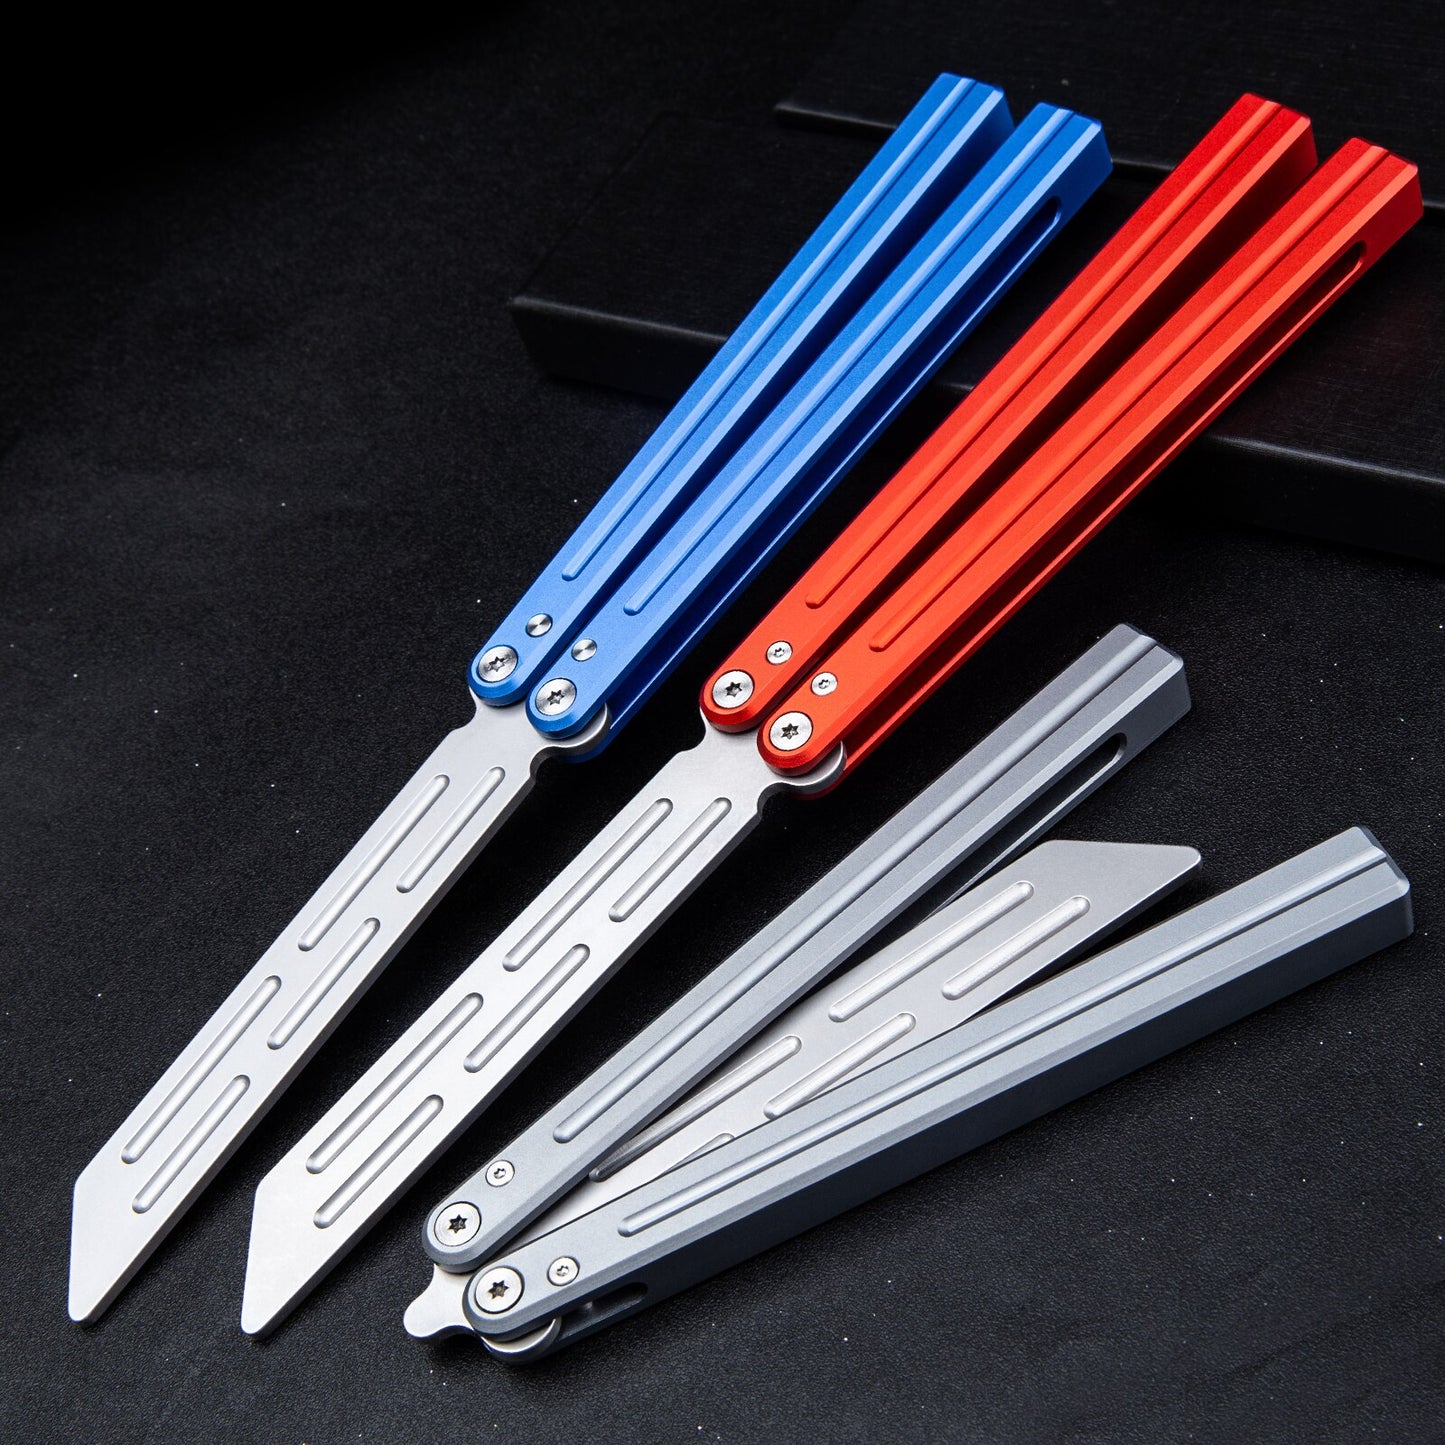 Baliplus triton v2 balisong trainer silver, red and blue